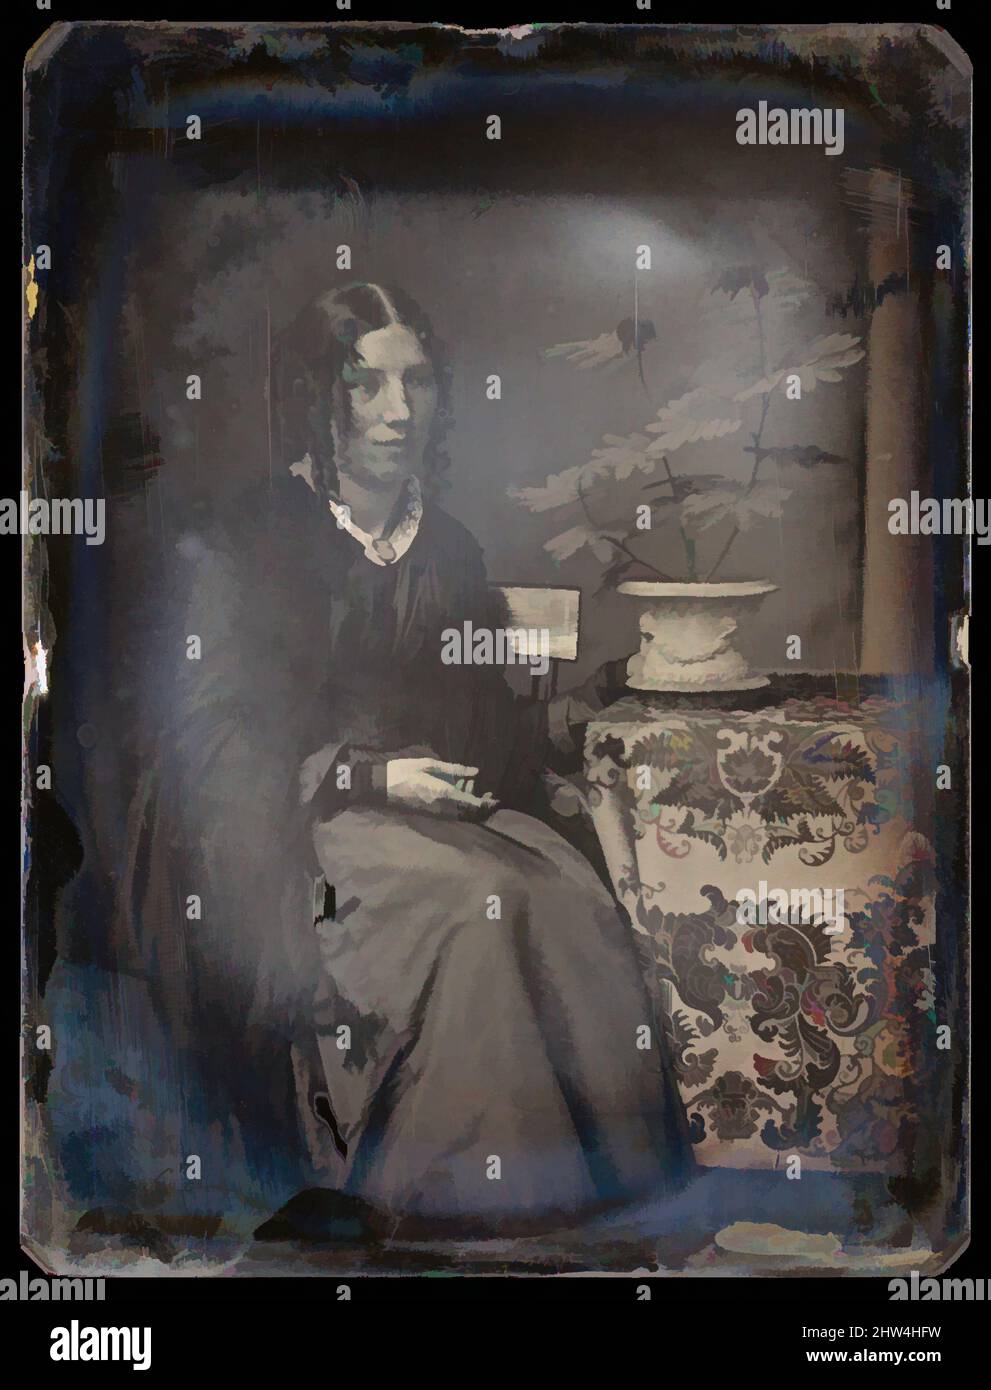 Art inspired by Harriet Beecher Stowe, 1850s, Daguerreotype, 10.8 x 8.3 cm. (4 1/4 x 3 1/4 in.), Photographs, Albert Sands Southworth (American, West Fairlee, Vermont 1811–1894 Charlestown, Massachusetts), Josiah Johnson Hawes (American, Wayland, Massachusetts 1808–1901 Crawford Notch, Classic works modernized by Artotop with a splash of modernity. Shapes, color and value, eye-catching visual impact on art. Emotions through freedom of artworks in a contemporary way. A timeless message pursuing a wildly creative new direction. Artists turning to the digital medium and creating the Artotop NFT Stock Photo